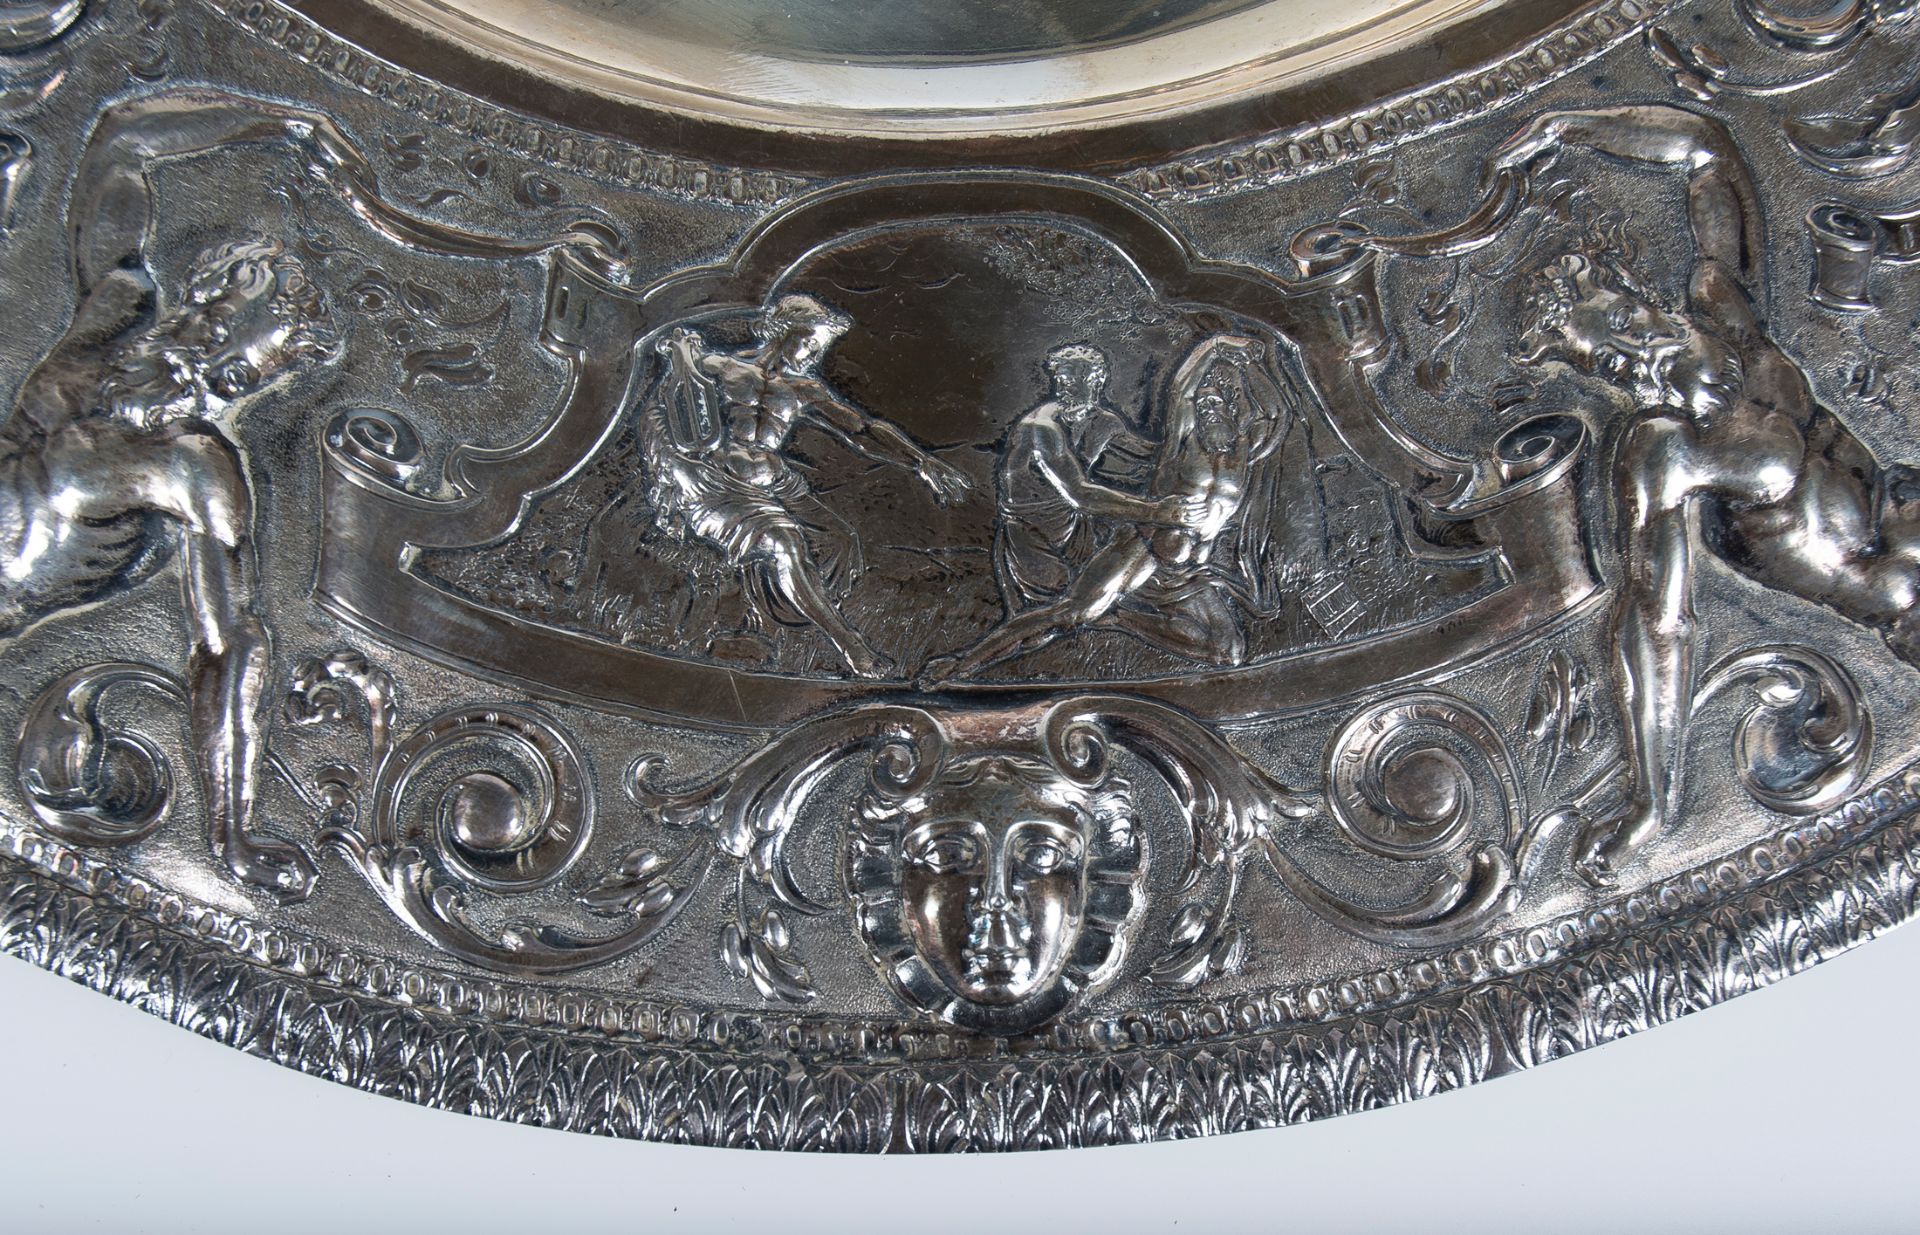 Large, embossed and chased silver plate. 19th century. - Image 4 of 7